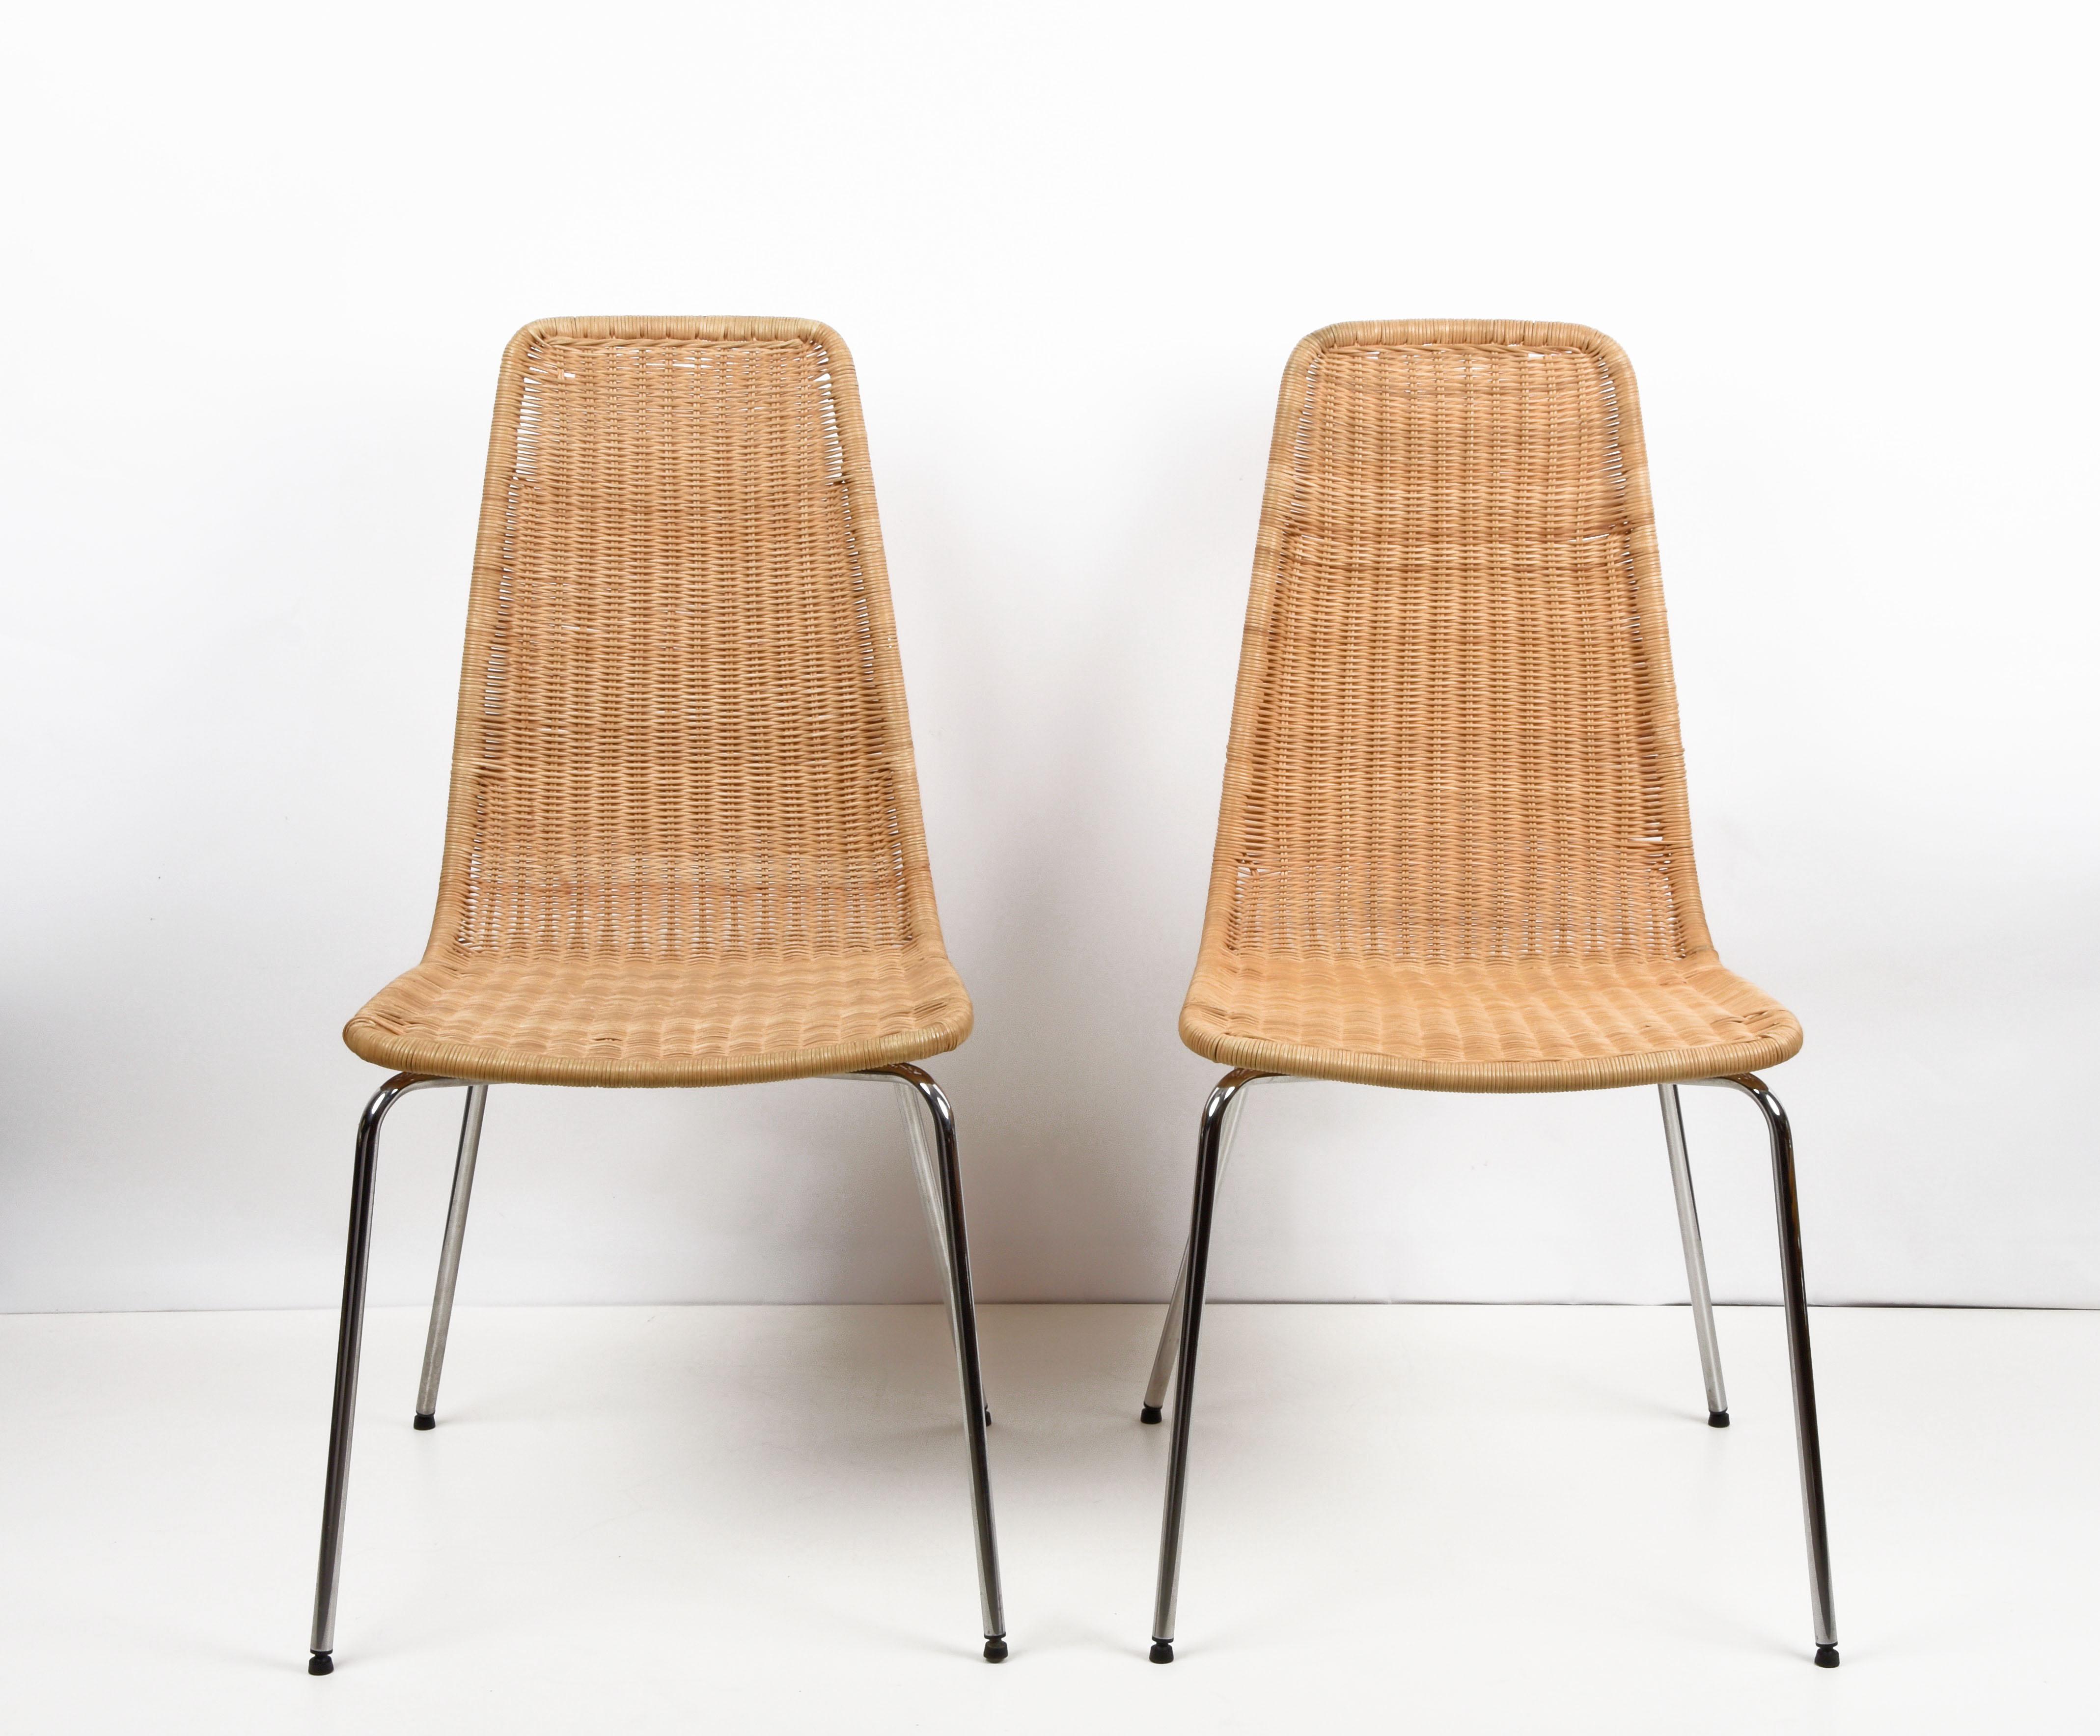 Midcentury Chromed Metal with Removable Rattan and Wicker Italian Chairs, 1970s For Sale 1